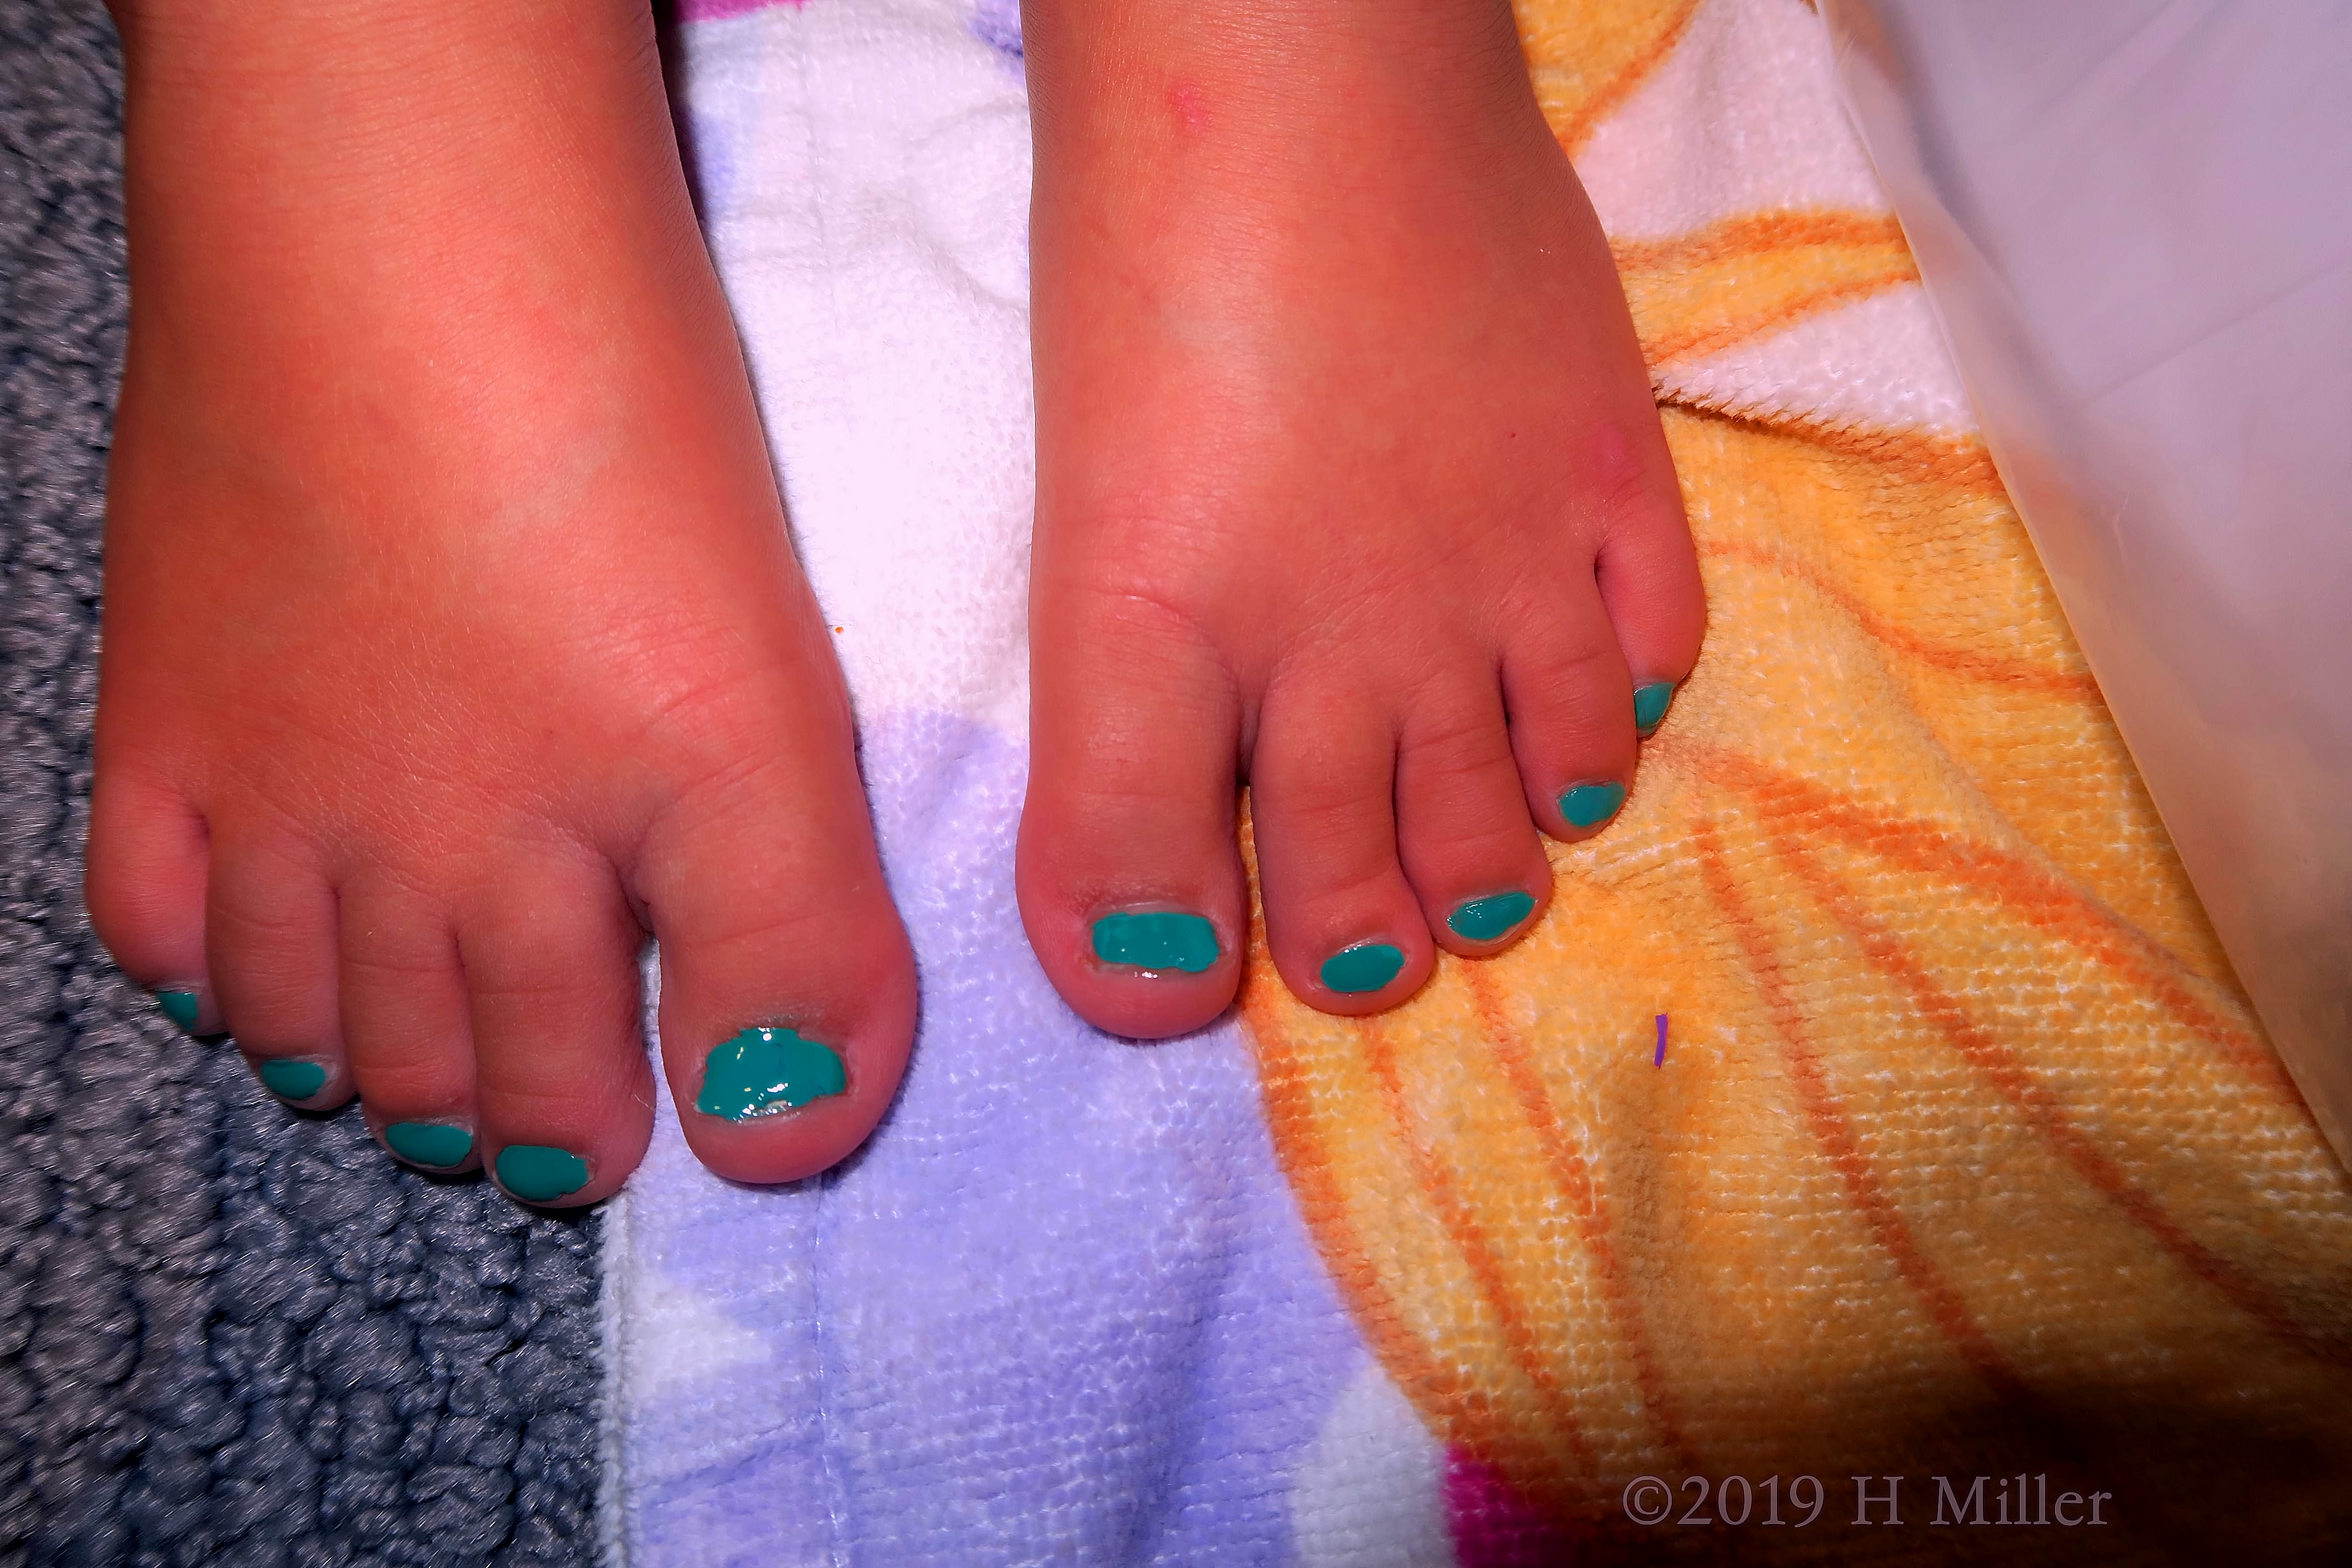 Transformative Teal Polished Pedicure! Kids Pedi At The Kids Spa Party! 